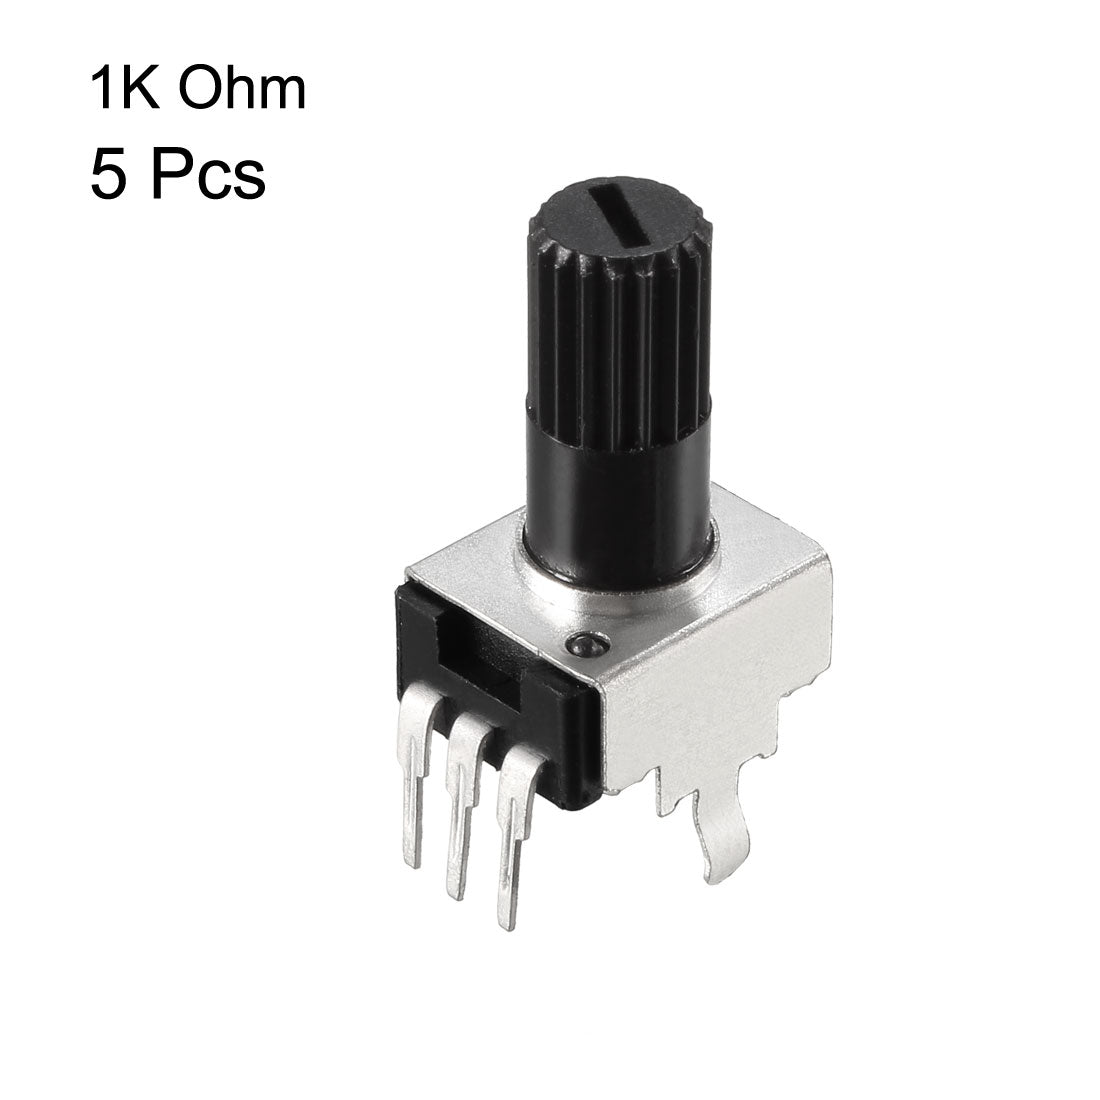 uxcell Uxcell Potentiometer 1K Ohm Variable Resistors Single Turn Rotary Carbon Film 5pcs